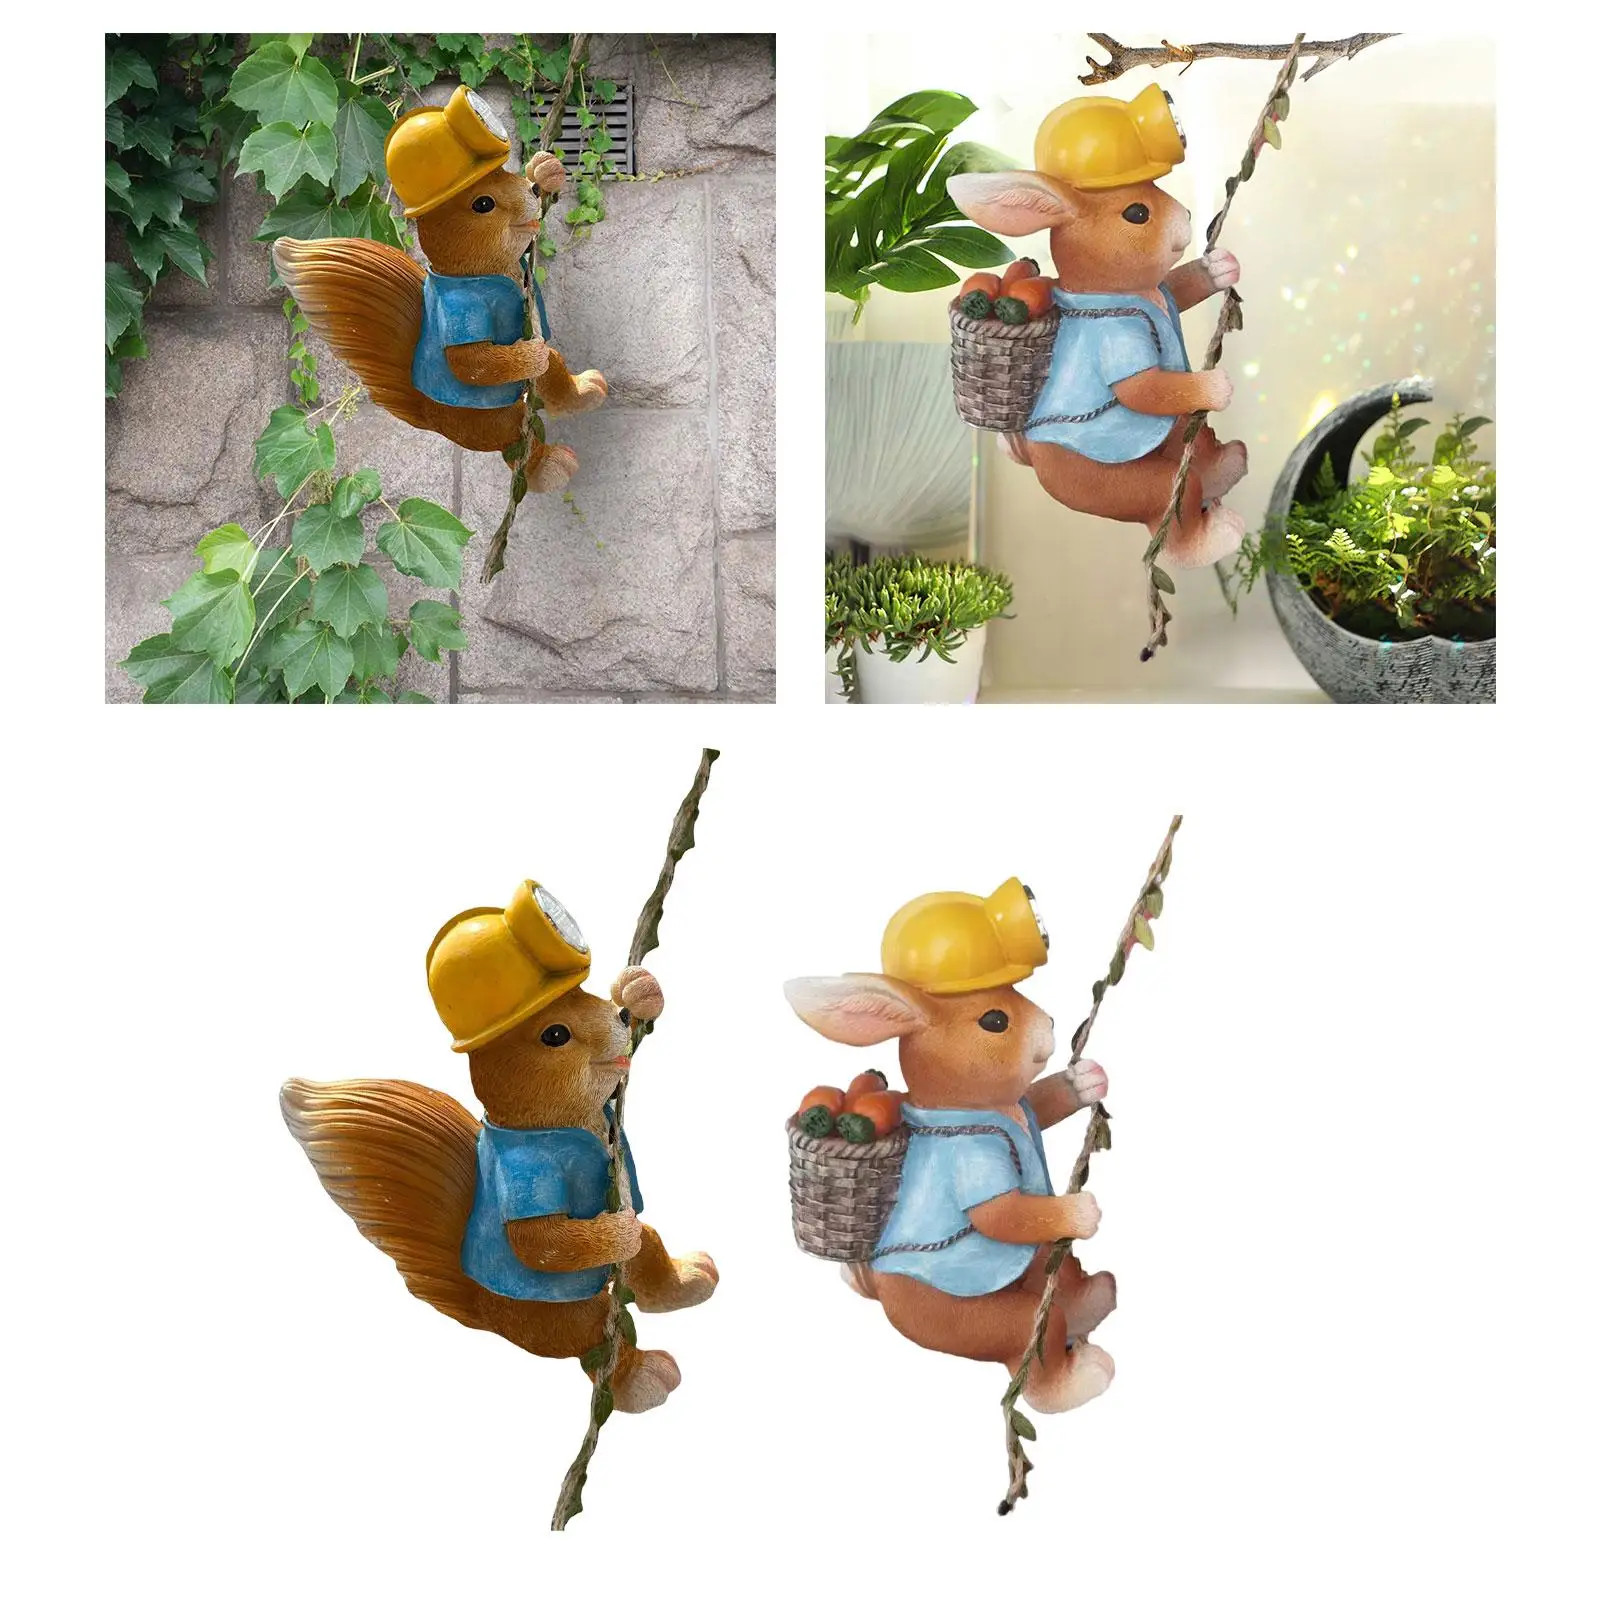 solar Statues Outdoor Resin Light Pendant Creative Cute Yard Animal Statues for